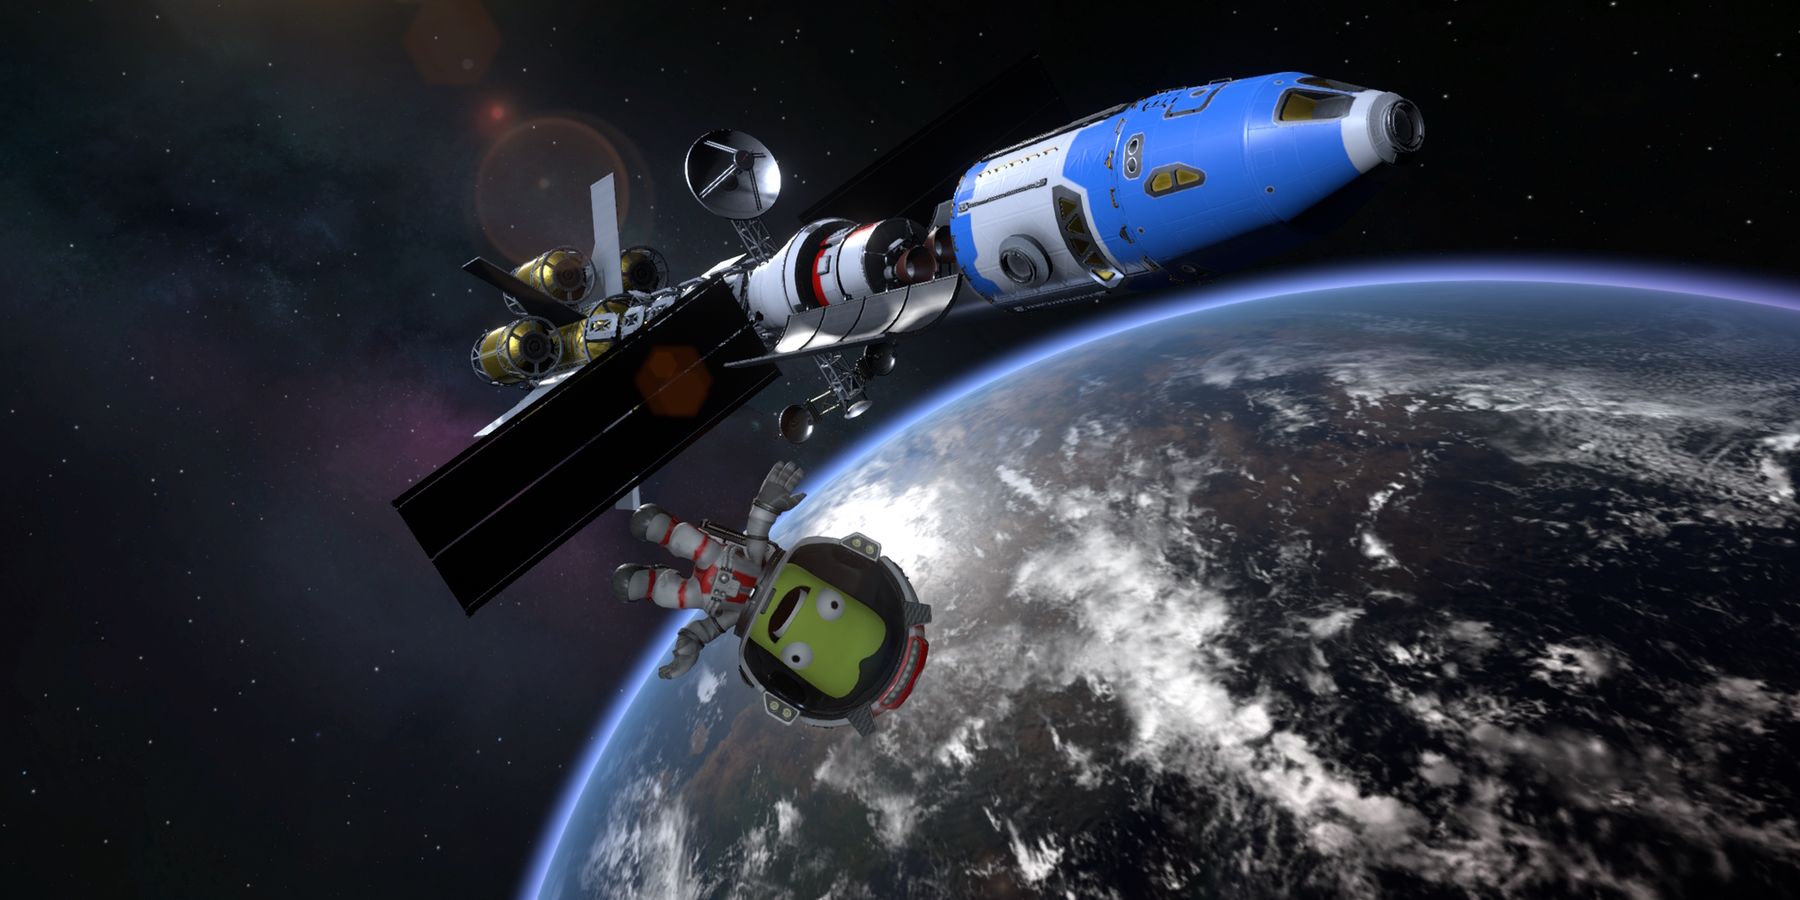 Kerbal Space Program 2, image of a rocket in space over the planet with an astronaut kerbal floating nearby